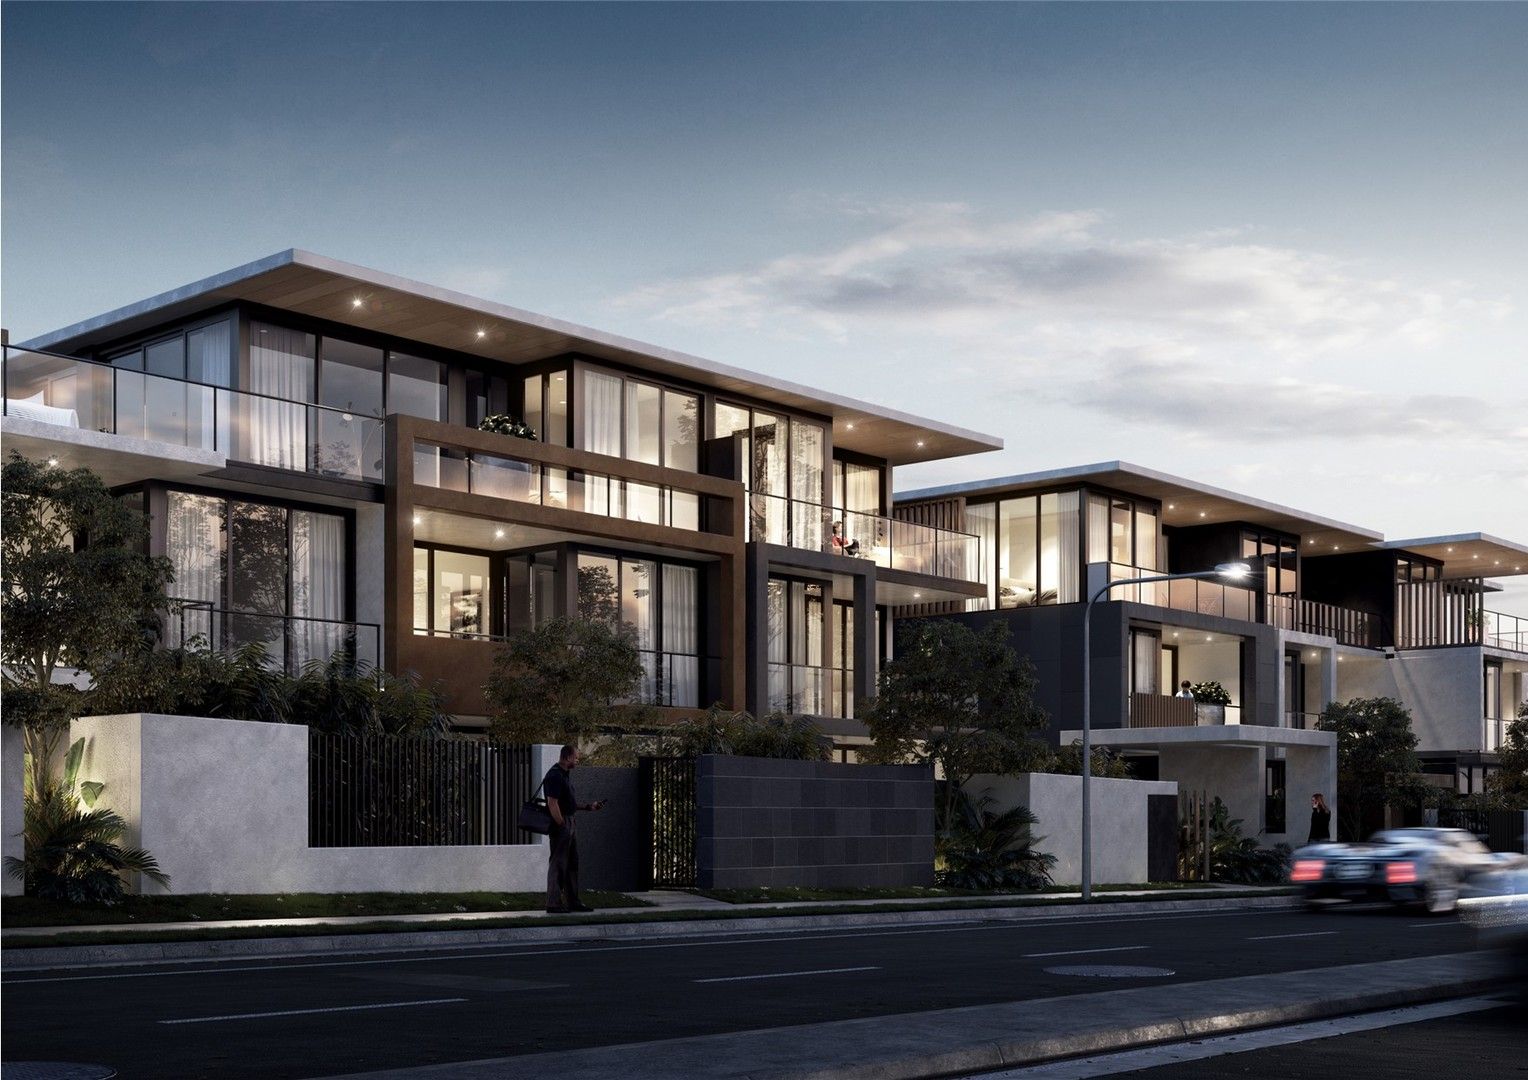 2 bedrooms New Apartments / Off the Plan in 32/253 Ashmore Road BENOWA QLD, 4217